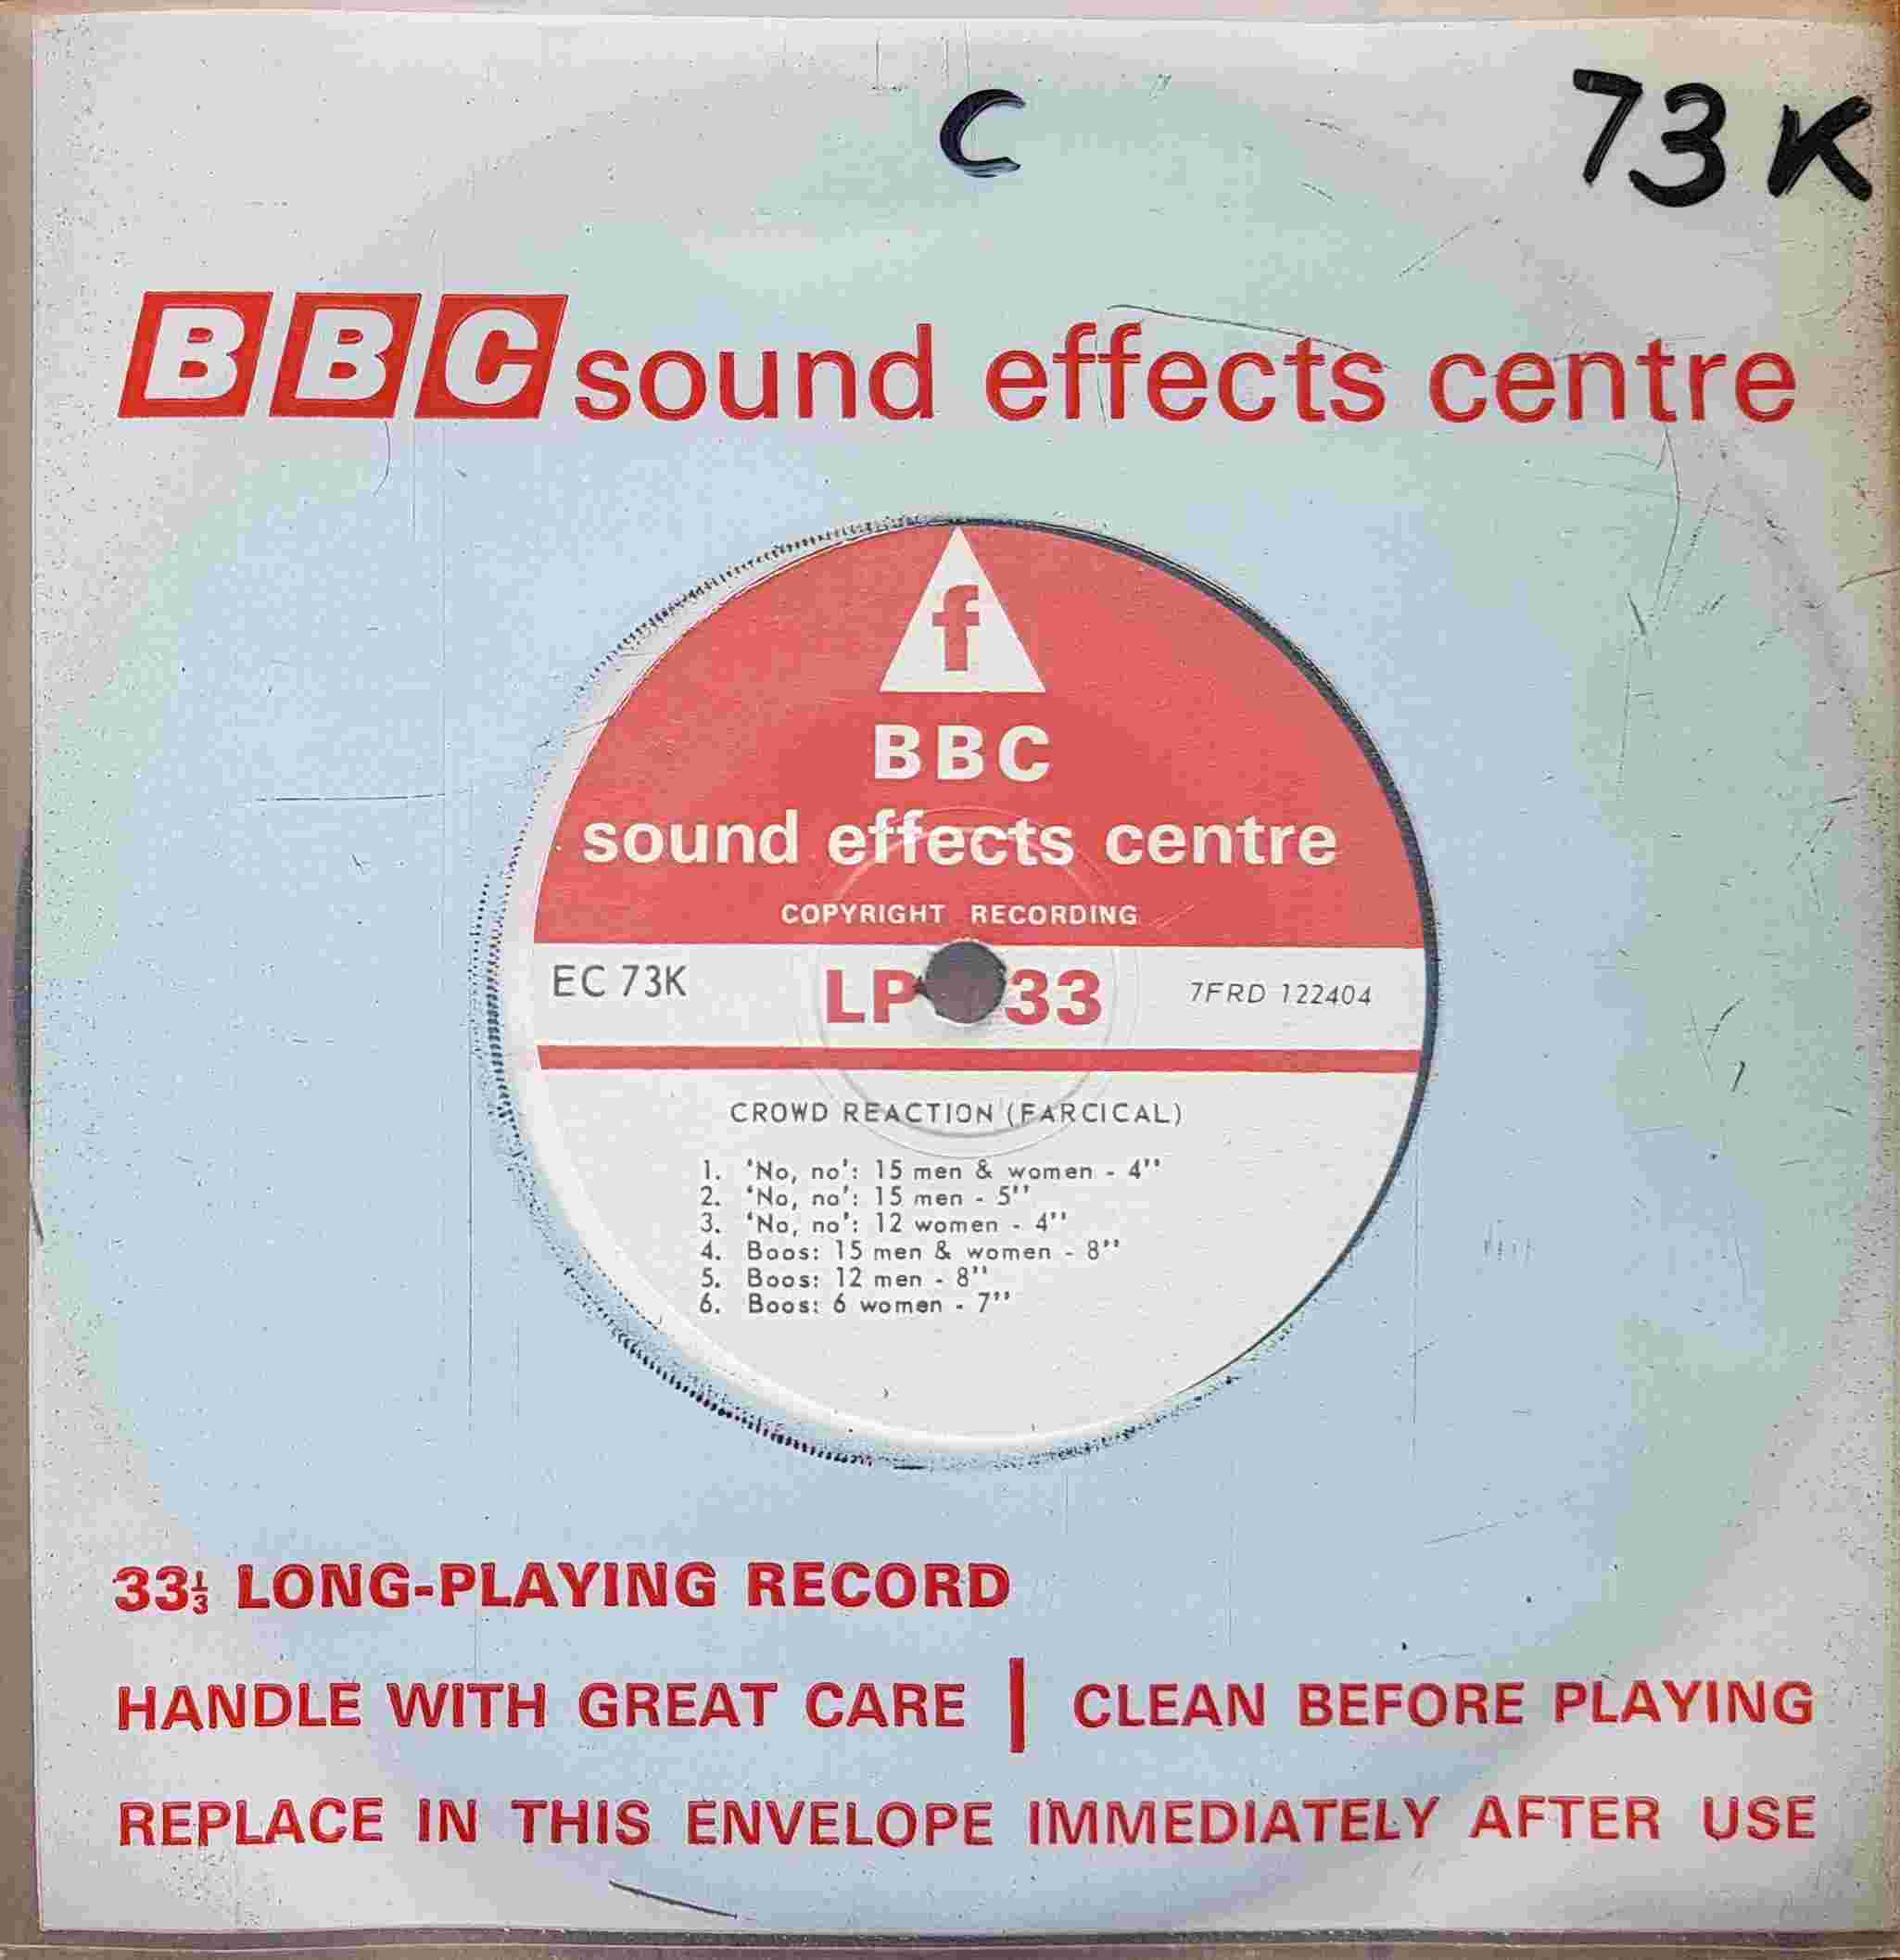 Picture of EC 73K Crowd reaction / Chatter (Farcical) single by artist Not registered from the BBC records and Tapes library